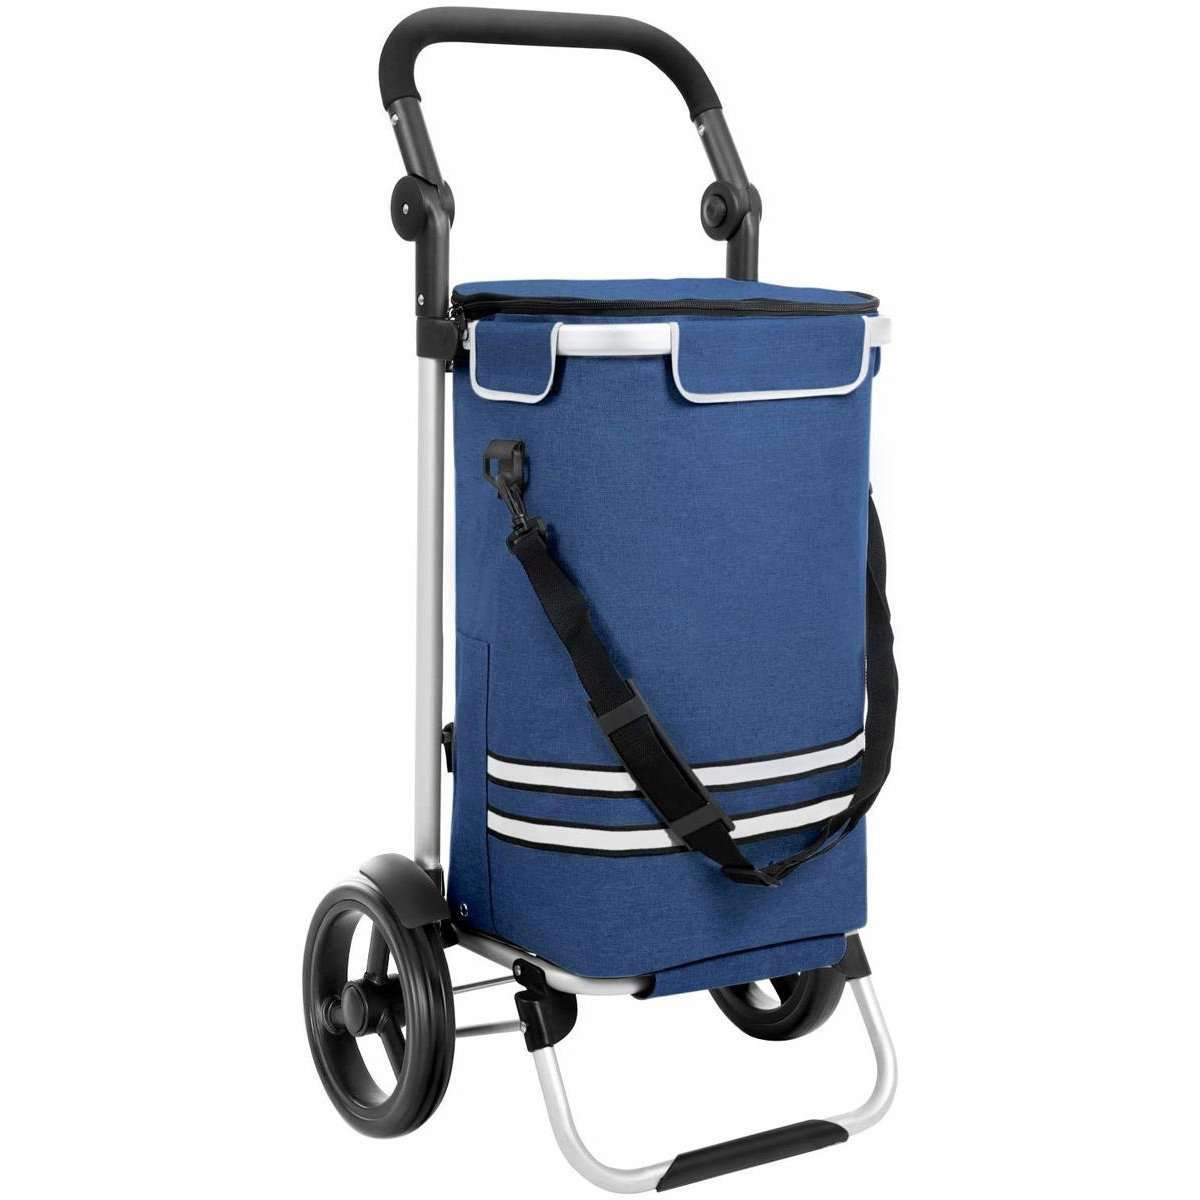 Nancy's Shopping Trolley - Shopping Trolleys with Wheels - Shopping Cart with Cool Bag